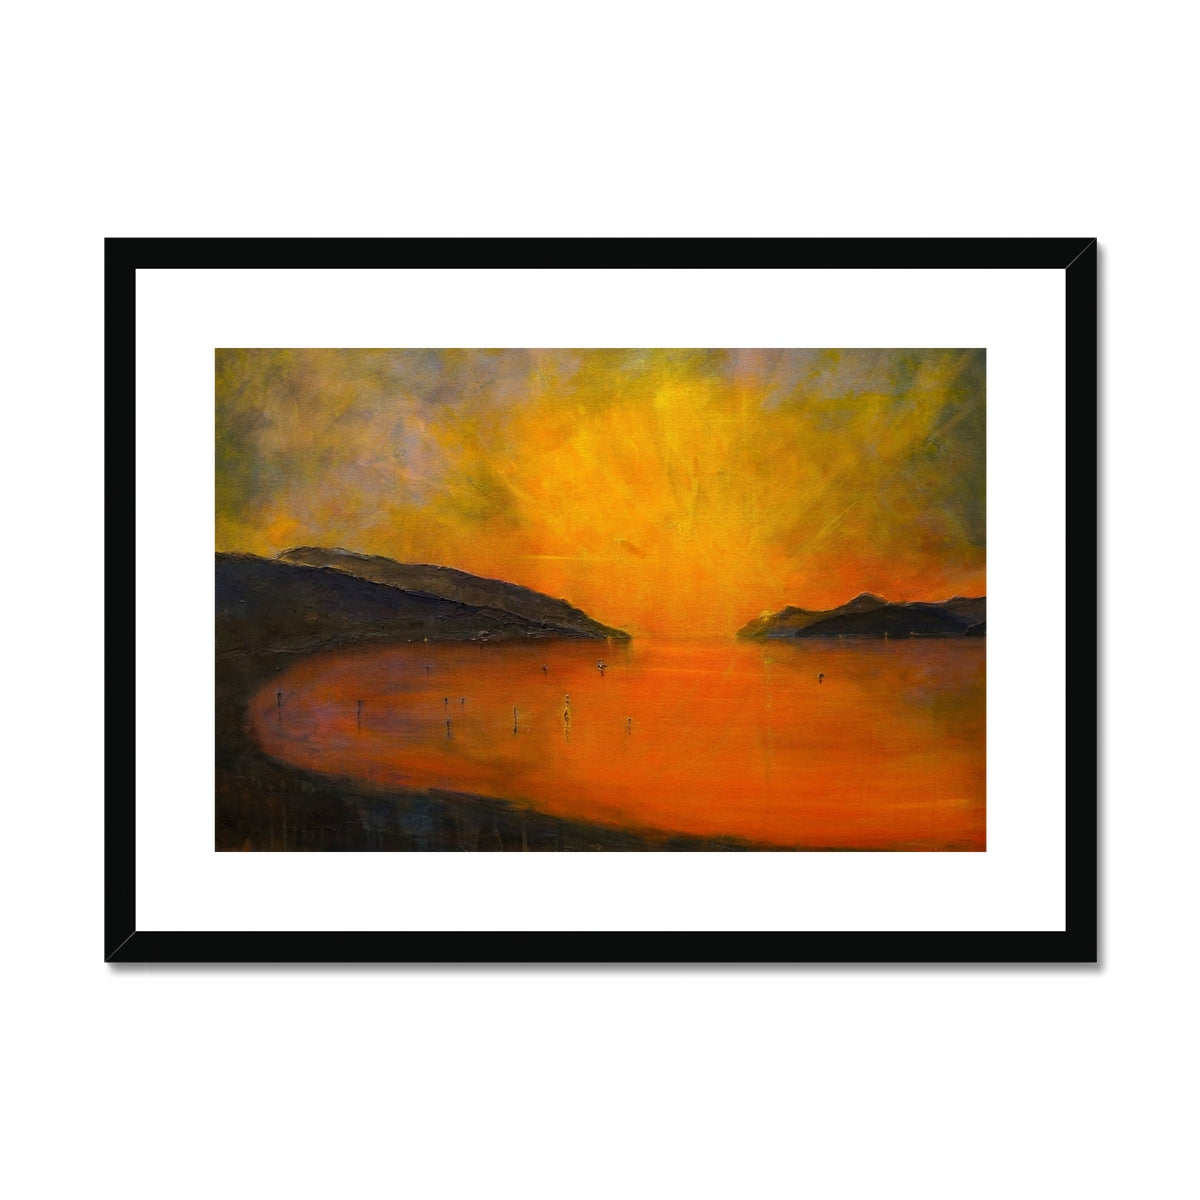 Loch Ness Sunset Painting | Framed & Mounted Prints From Scotland-Framed & Mounted Prints-Scottish Lochs & Mountains Art Gallery-A2 Landscape-Black Frame-Paintings, Prints, Homeware, Art Gifts From Scotland By Scottish Artist Kevin Hunter